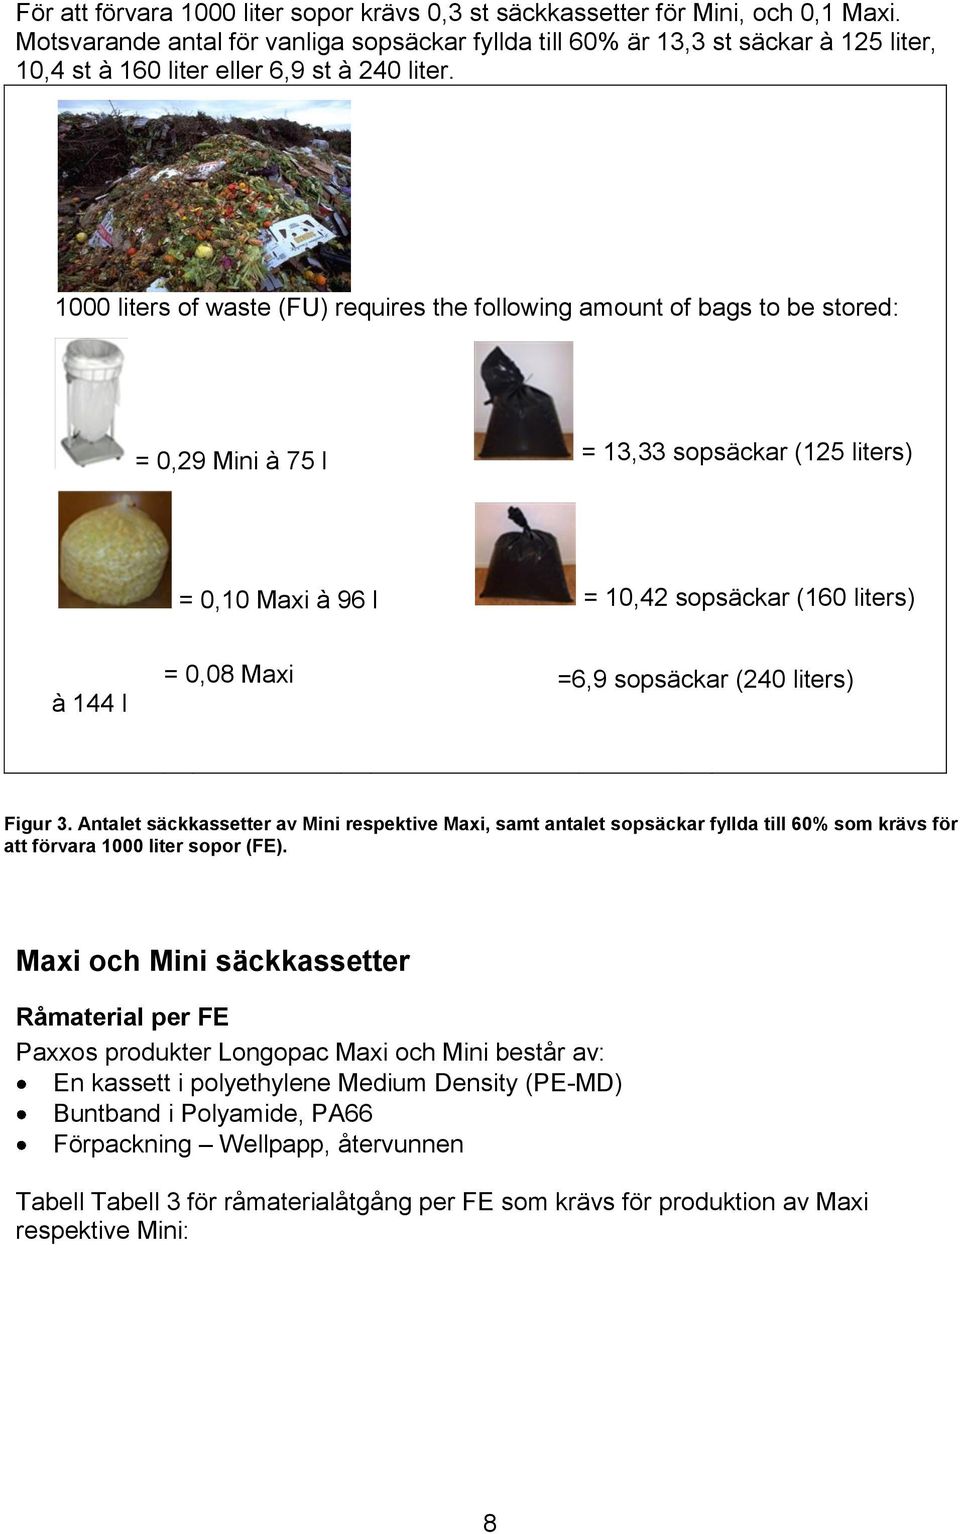 1000 liters of waste (FU) requires the following amount of bags to be stored: = 0,29 Mini à 75 l = 13,33 sopsäckar (125 liters) = 0,10 Maxi à 96 l = 10,42 sopsäckar (160 liters) à 144 l = 0,08 Maxi